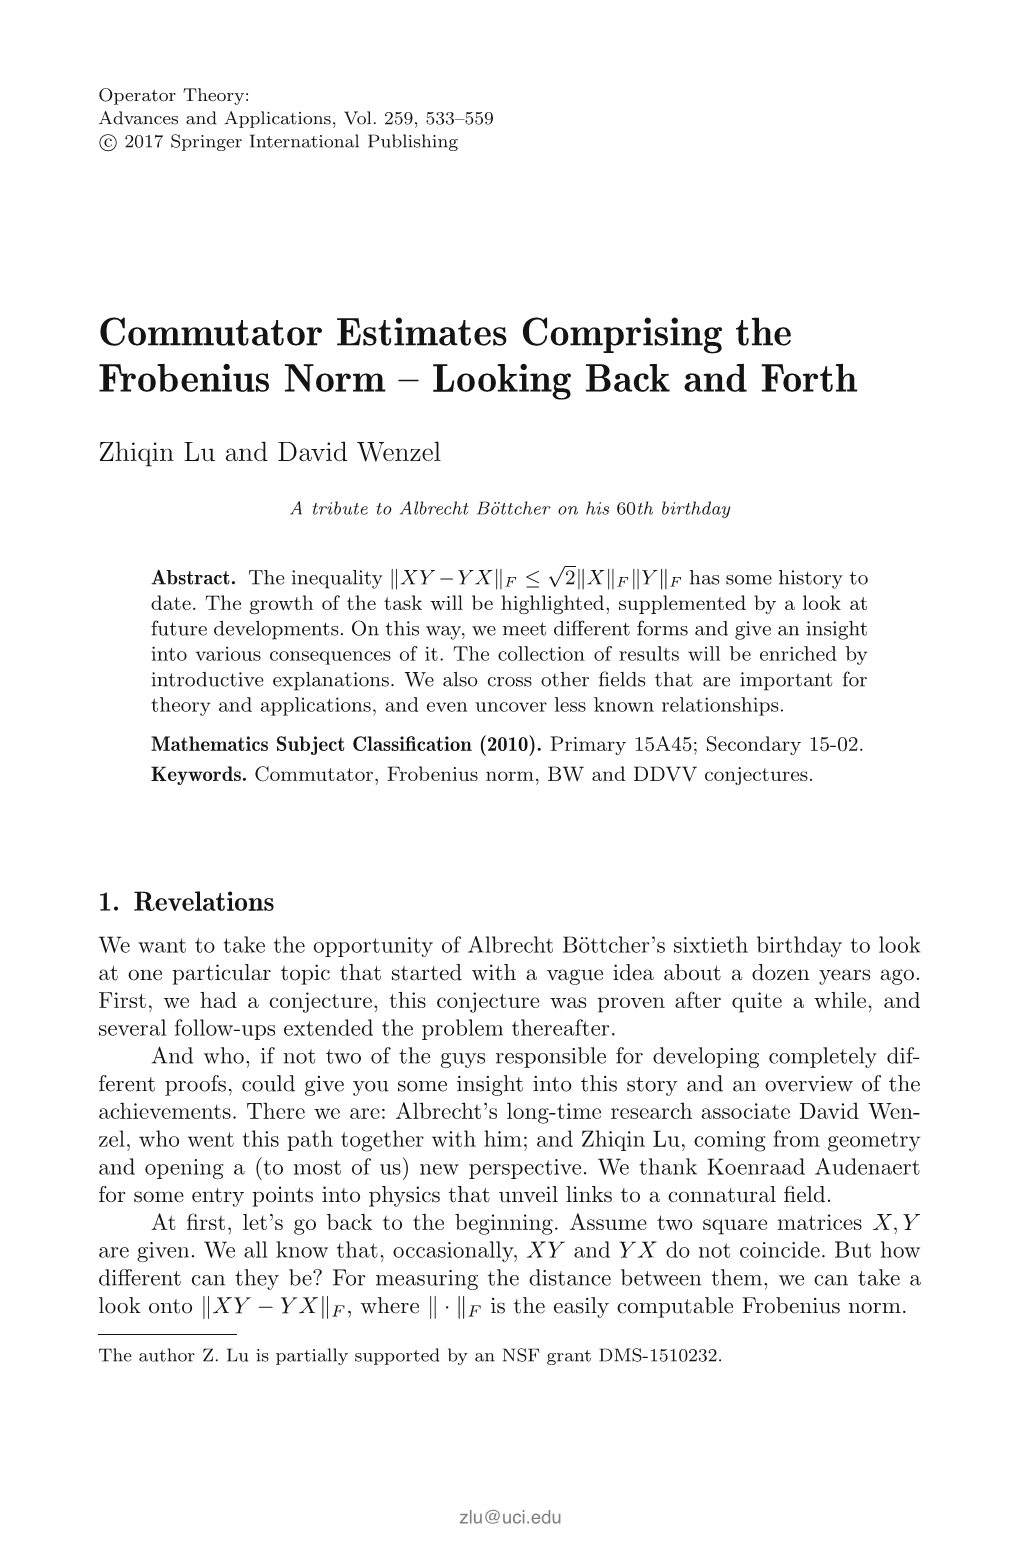 Commutator Estimates Comprising the Frobenius Norm – Looking Back and Forth